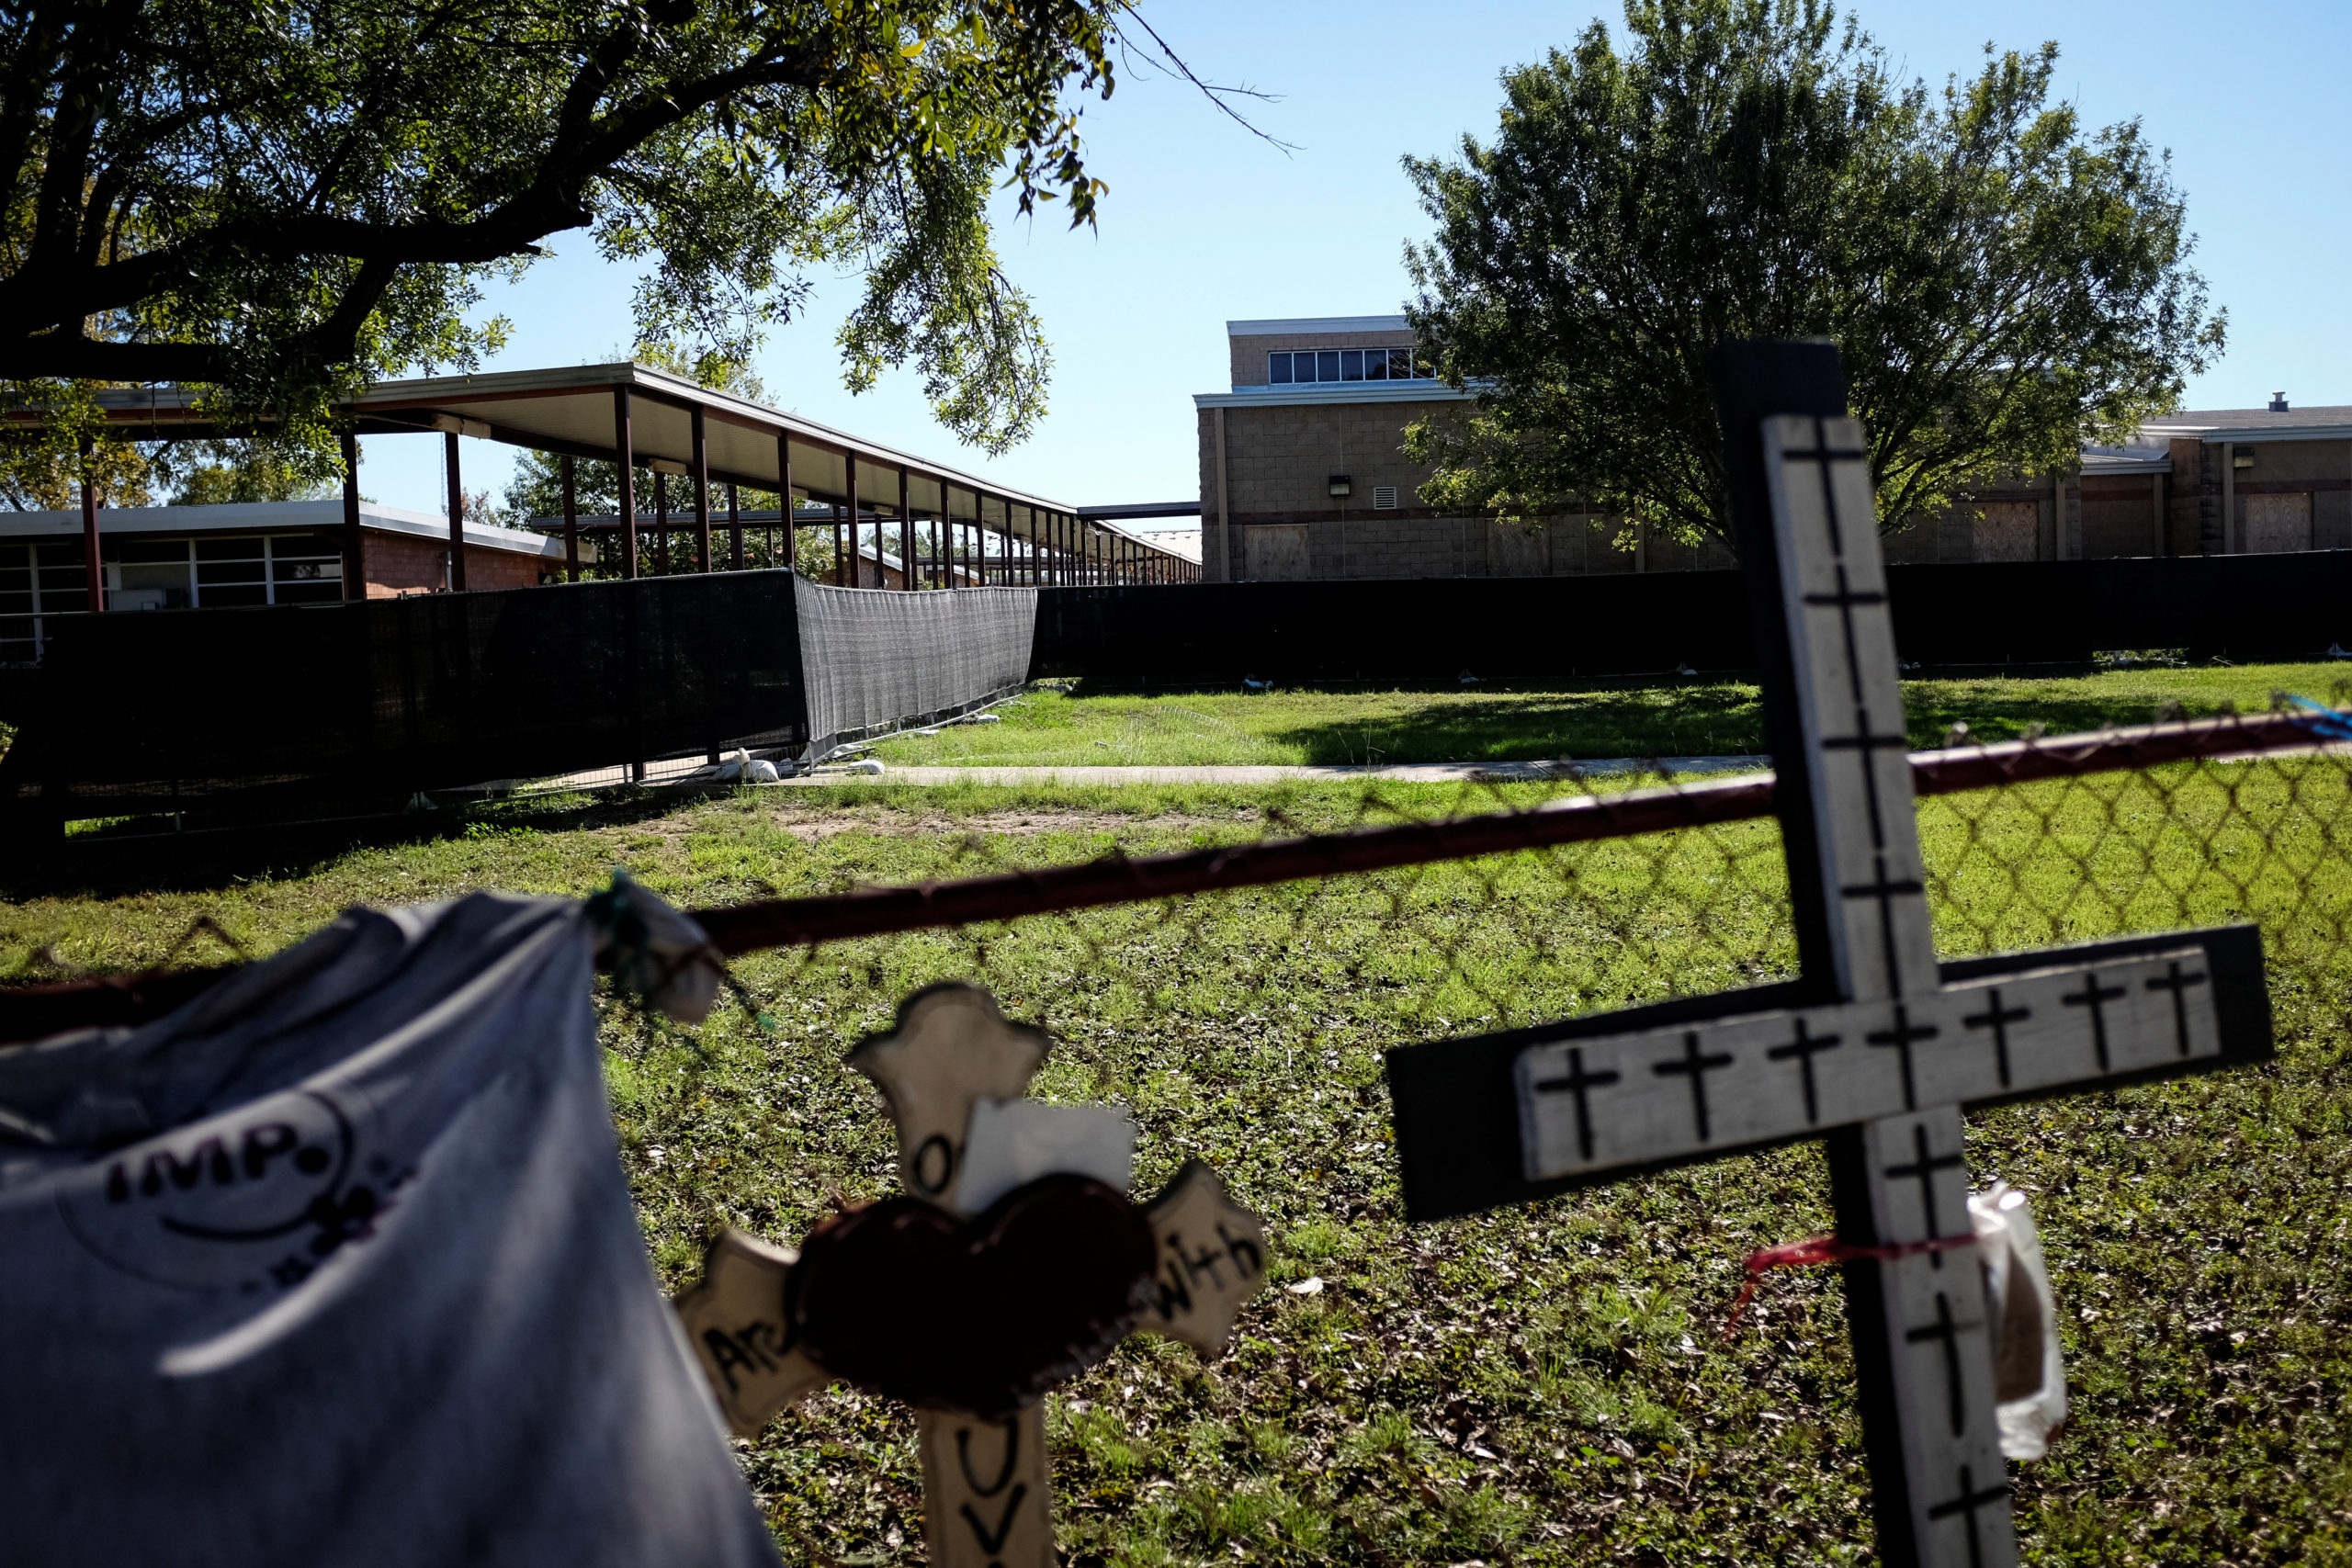 A glimpse of the memorial in front of Robb Elementary. Some handmade crosses can be seen up against the school yard fence.